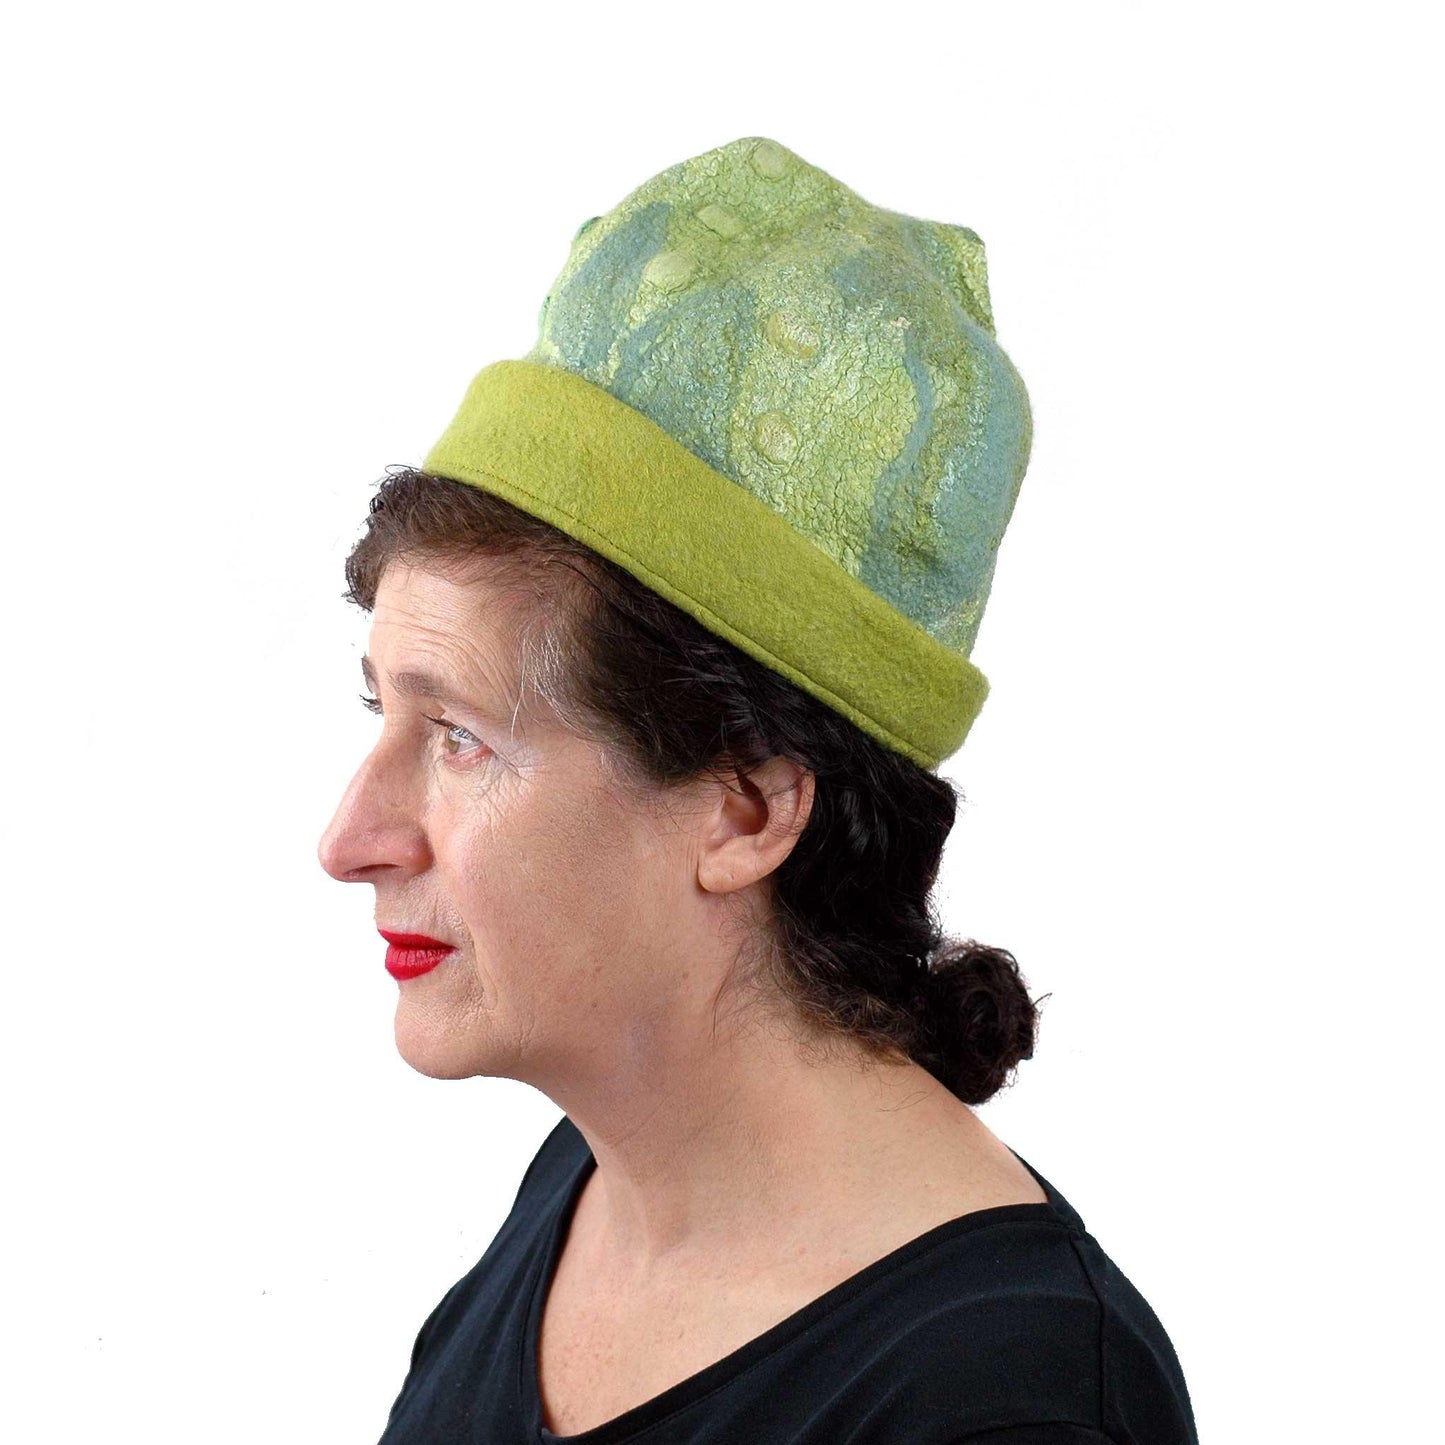 Asparagus Green Beanie with Fishtail on Top - Small Size - side view